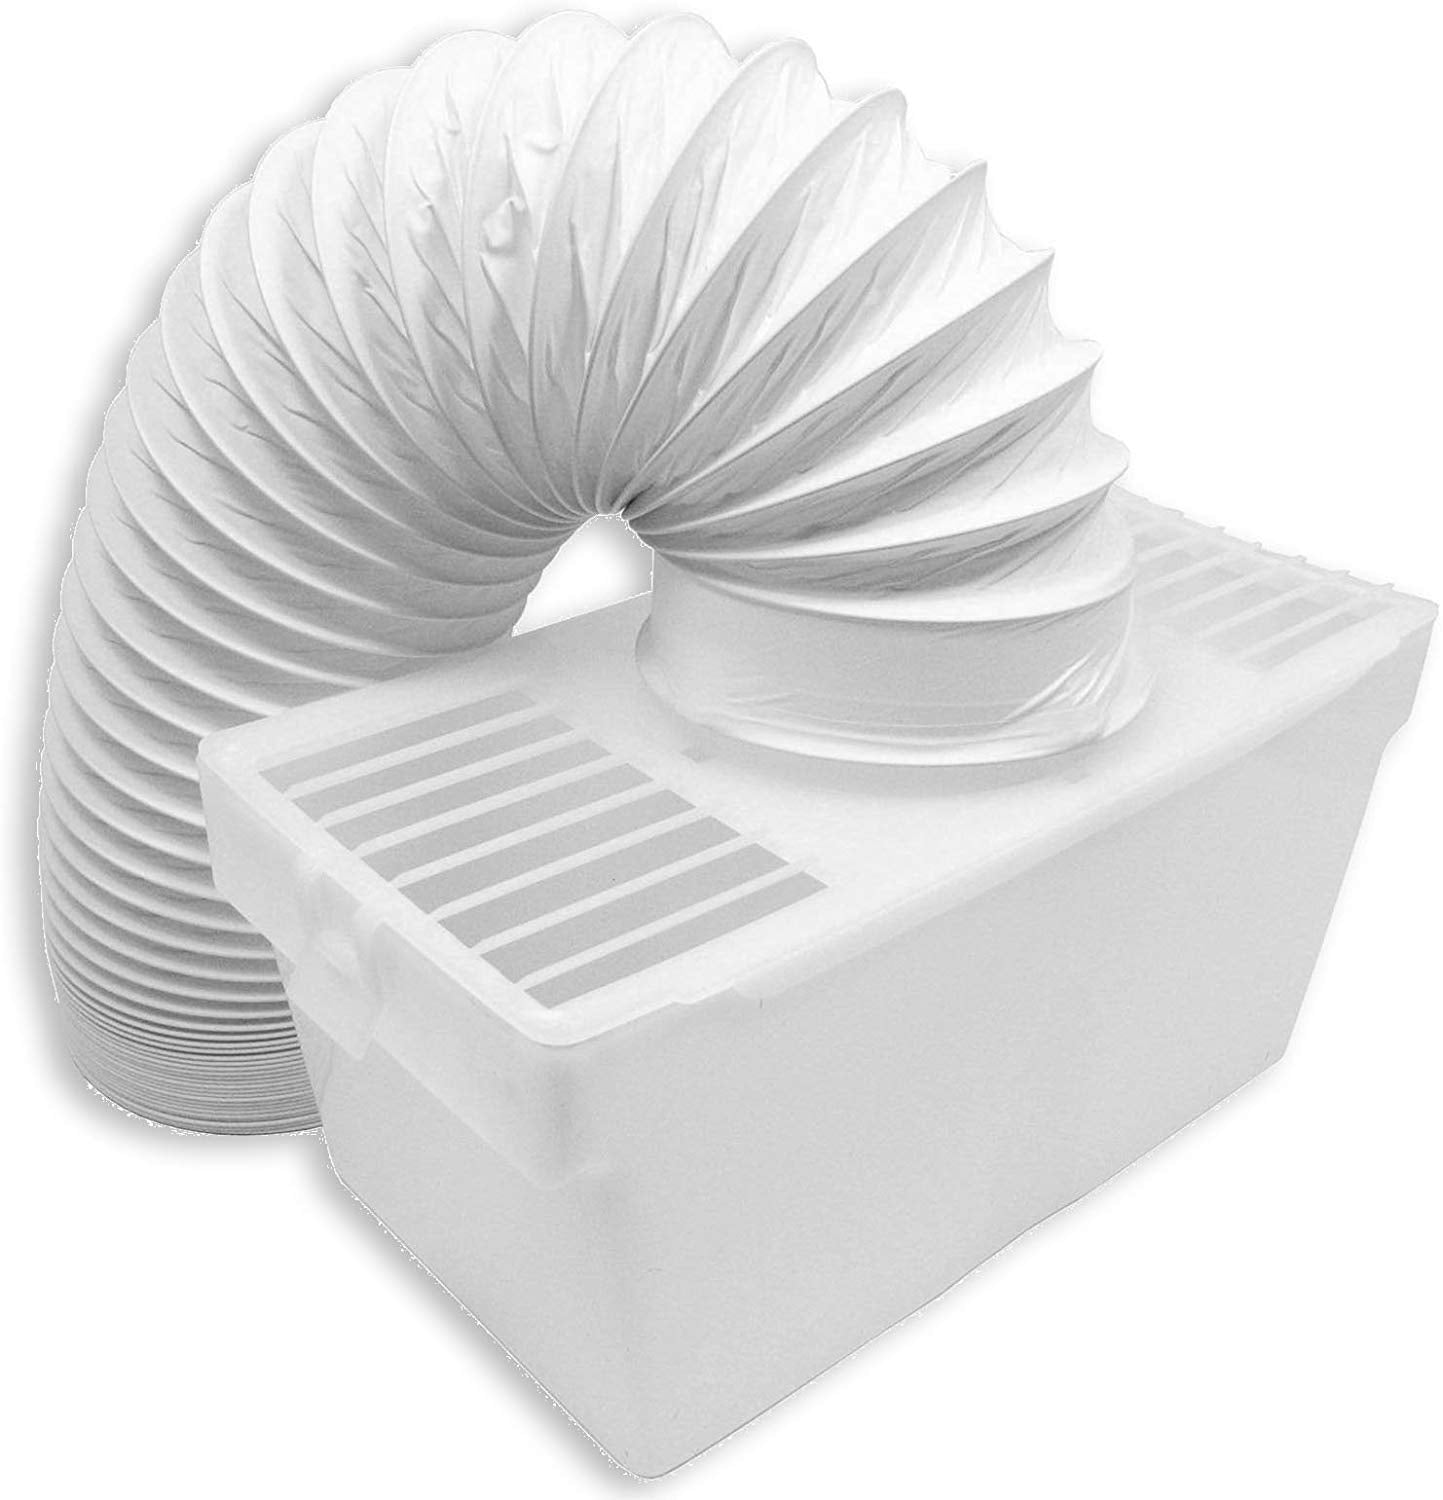 Condenser Vent Box & Hose Kit for Electra Vented Tumble Dryers (1.5m / 4" Diameter)